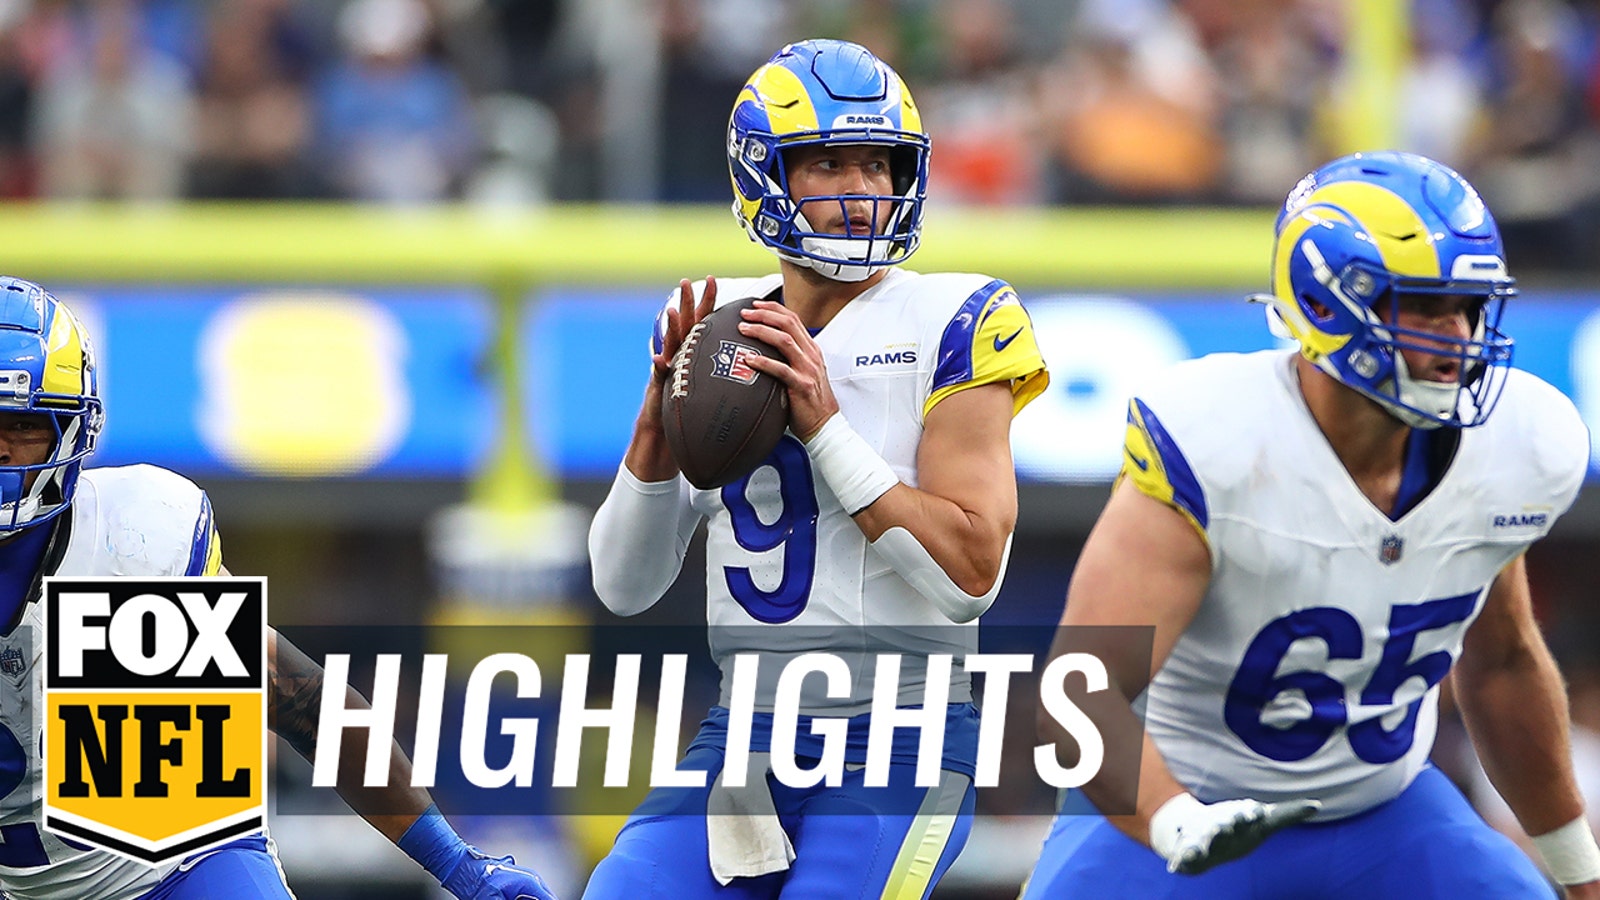 Matthew Stafford throws for three TDs to help Rams secure victory over Browns